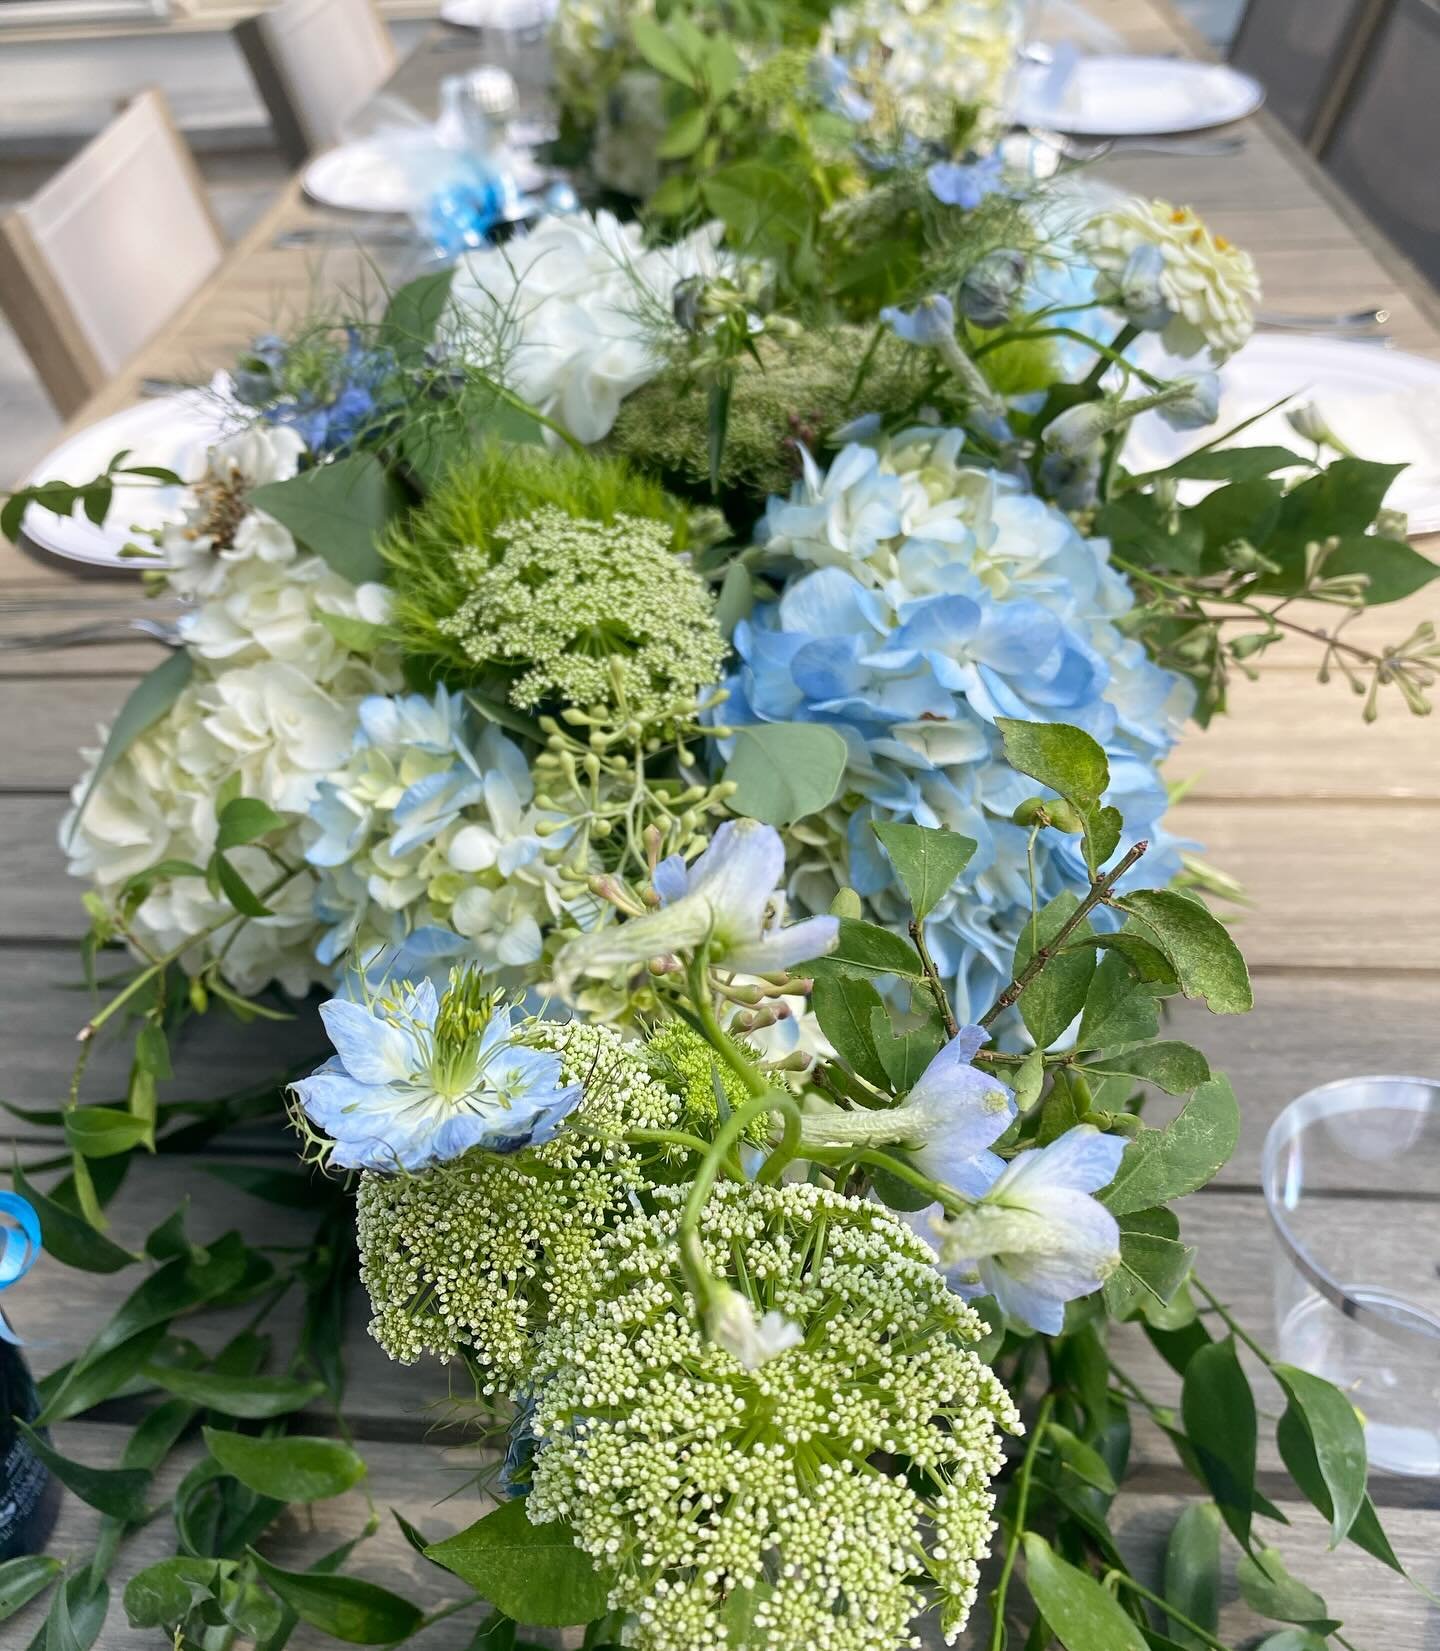 Passover 1st night- White &amp; Brights, Clean Greens, Coastal Cool or Spring Stylish&hellip;  Tall, short, low, lush .. 🫶

We have been taking custom orders and can take them through this Friday. Your vases or ours.  We are opening Monday to delive